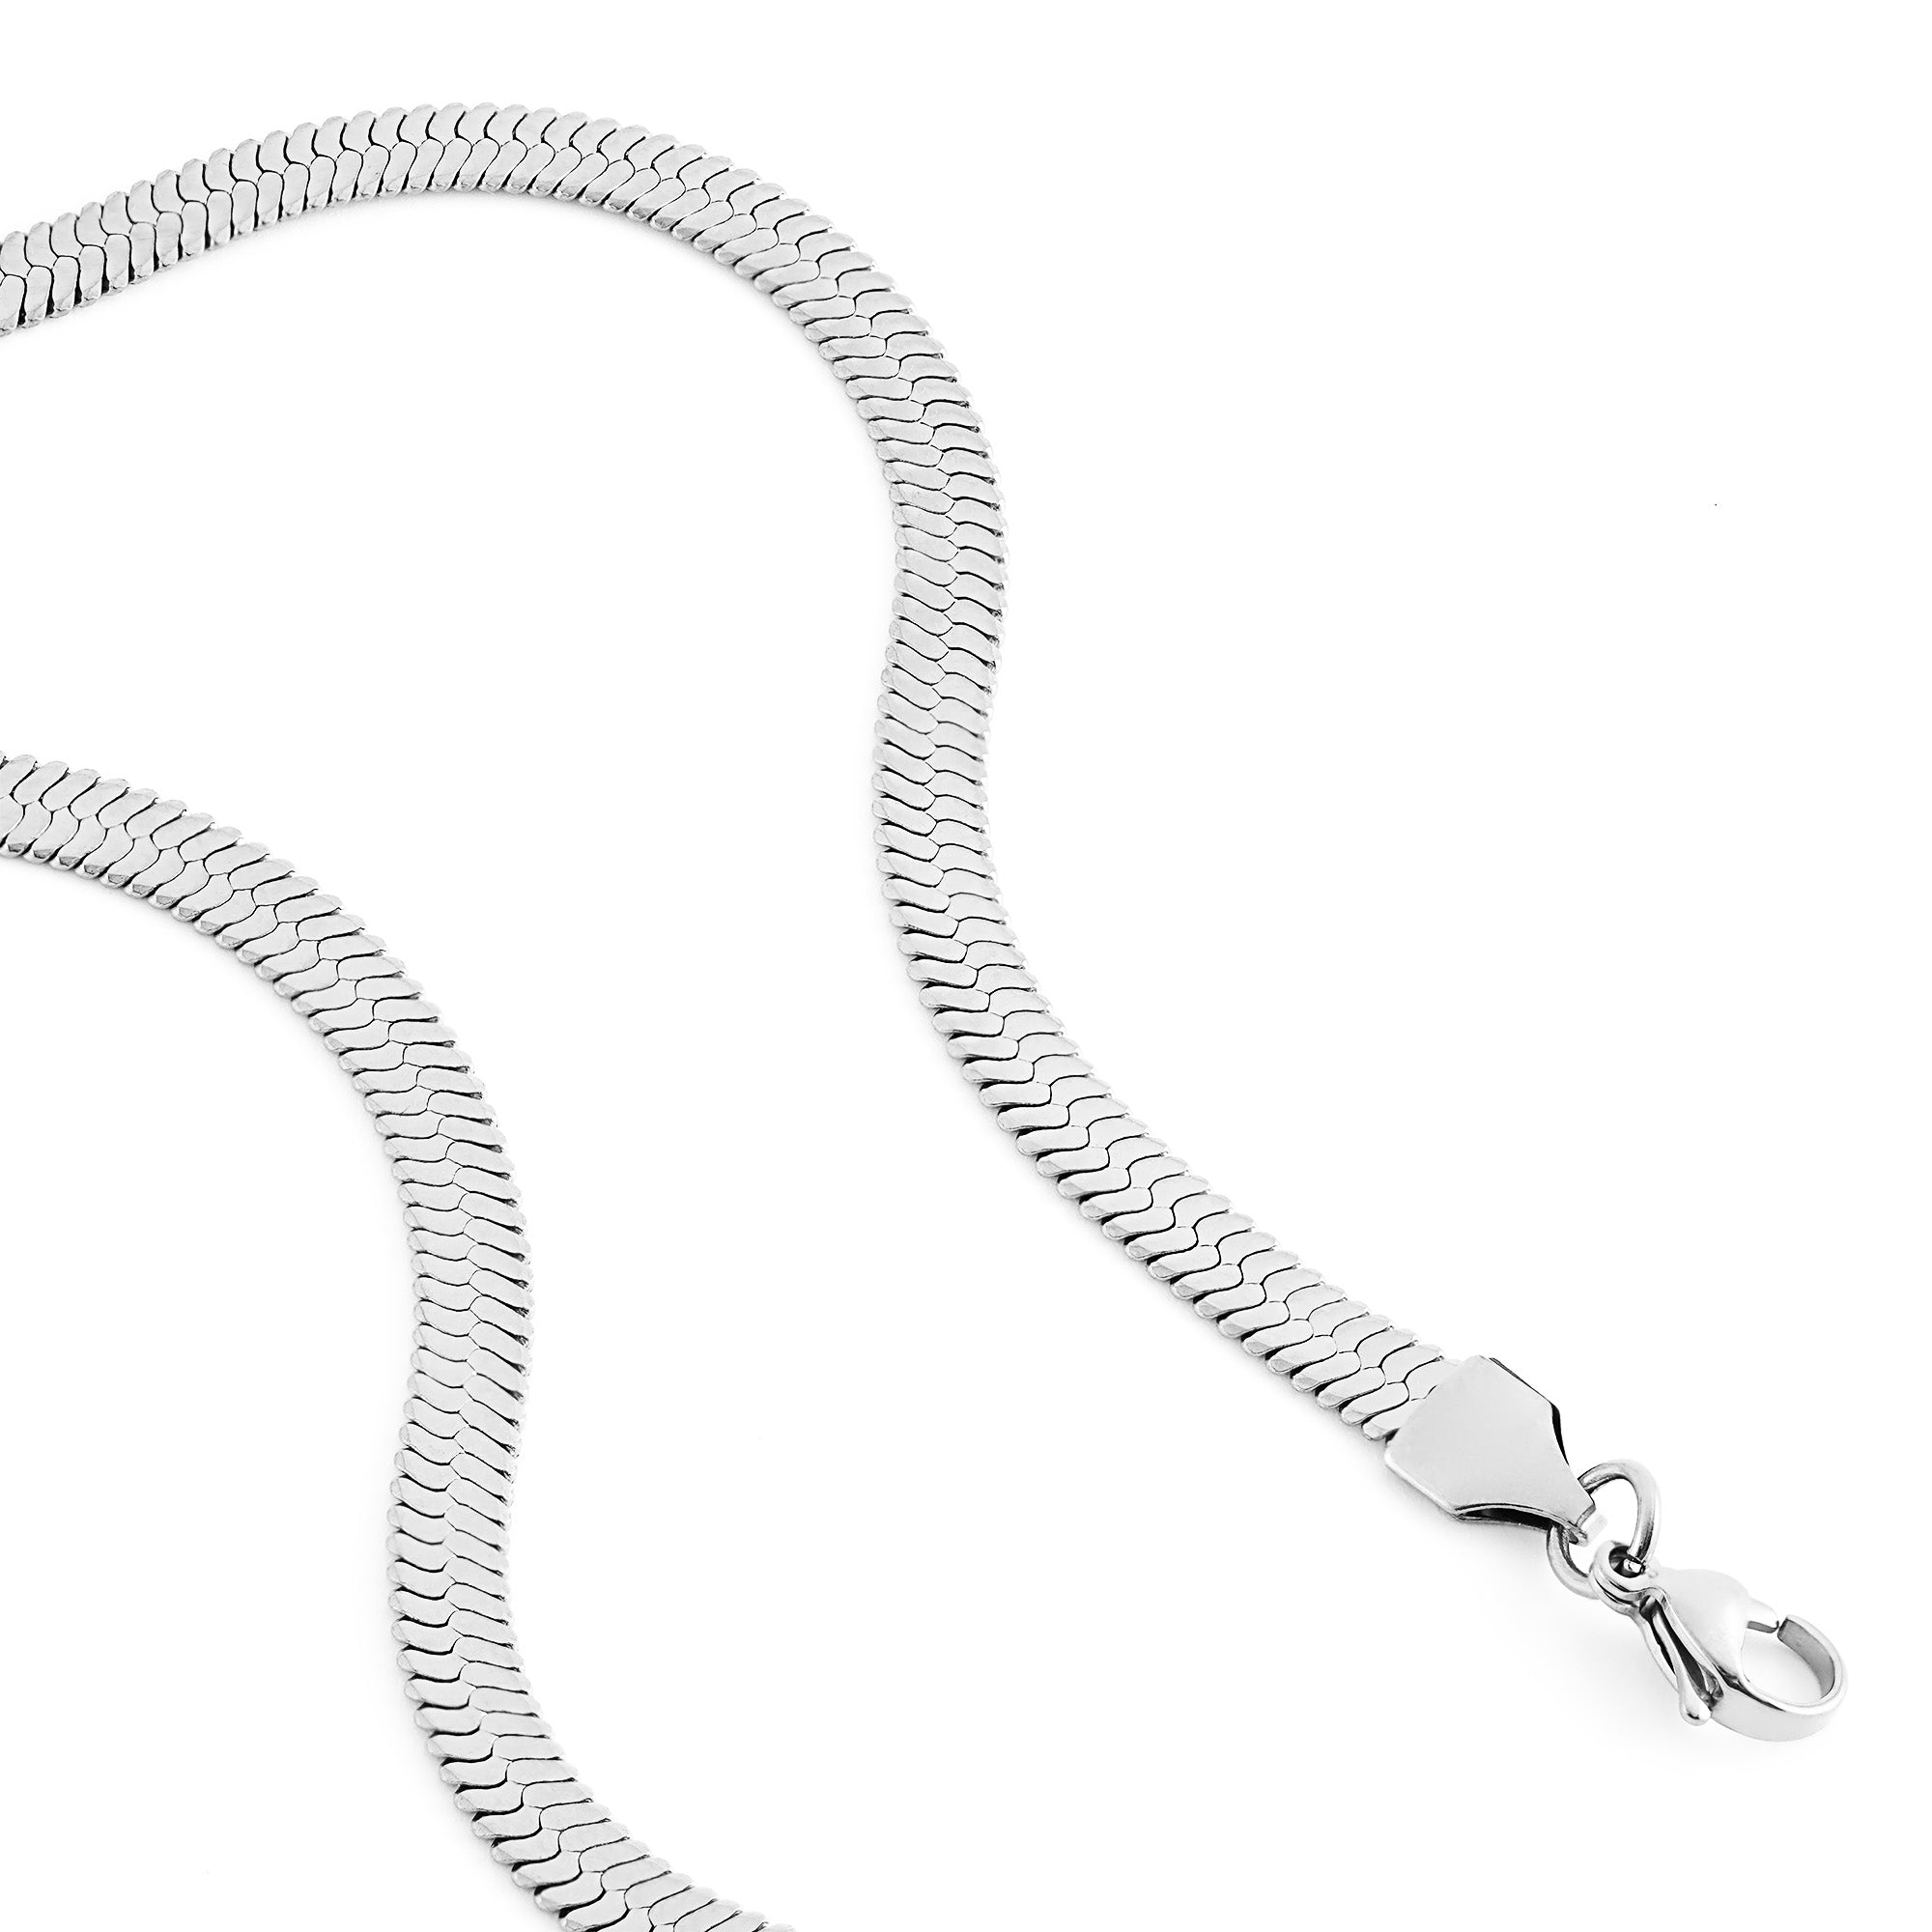 Orta women's necklace by Five Jwlry, crafted from a 5mm herringbone chain in silver-colored, water-resistant 316L stainless steel. Available in size 37cm with a 5cm extension. Hypoallergenic with a 2-year warranty.